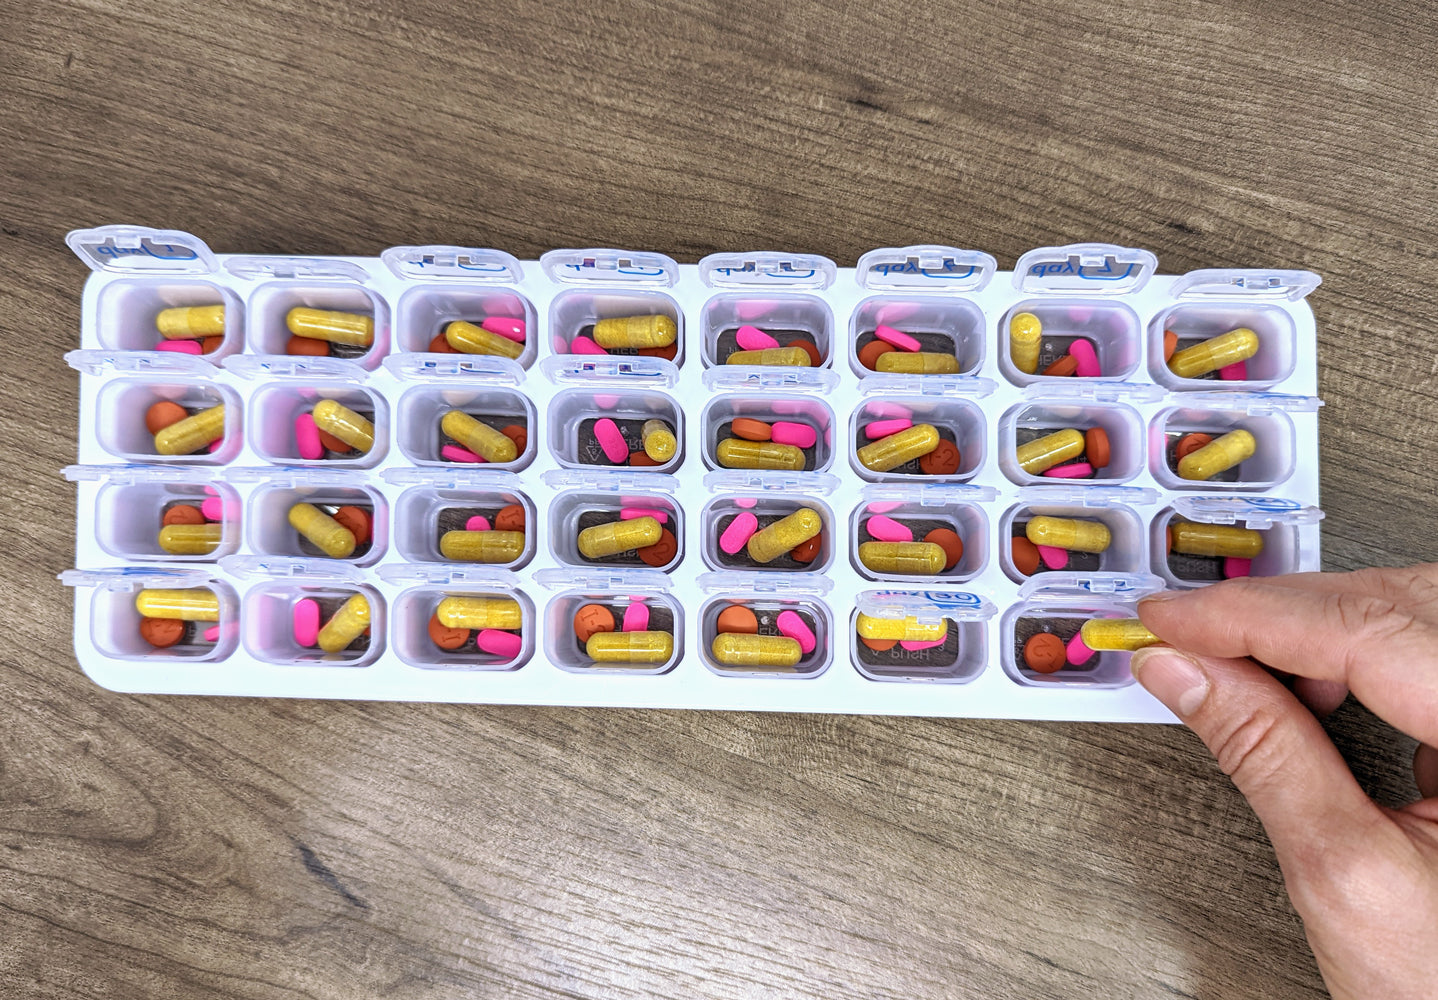 31 Day Monthly Pill Organizer Tray with Daily Removable Pill Box Pods (1 Pack, Clear)